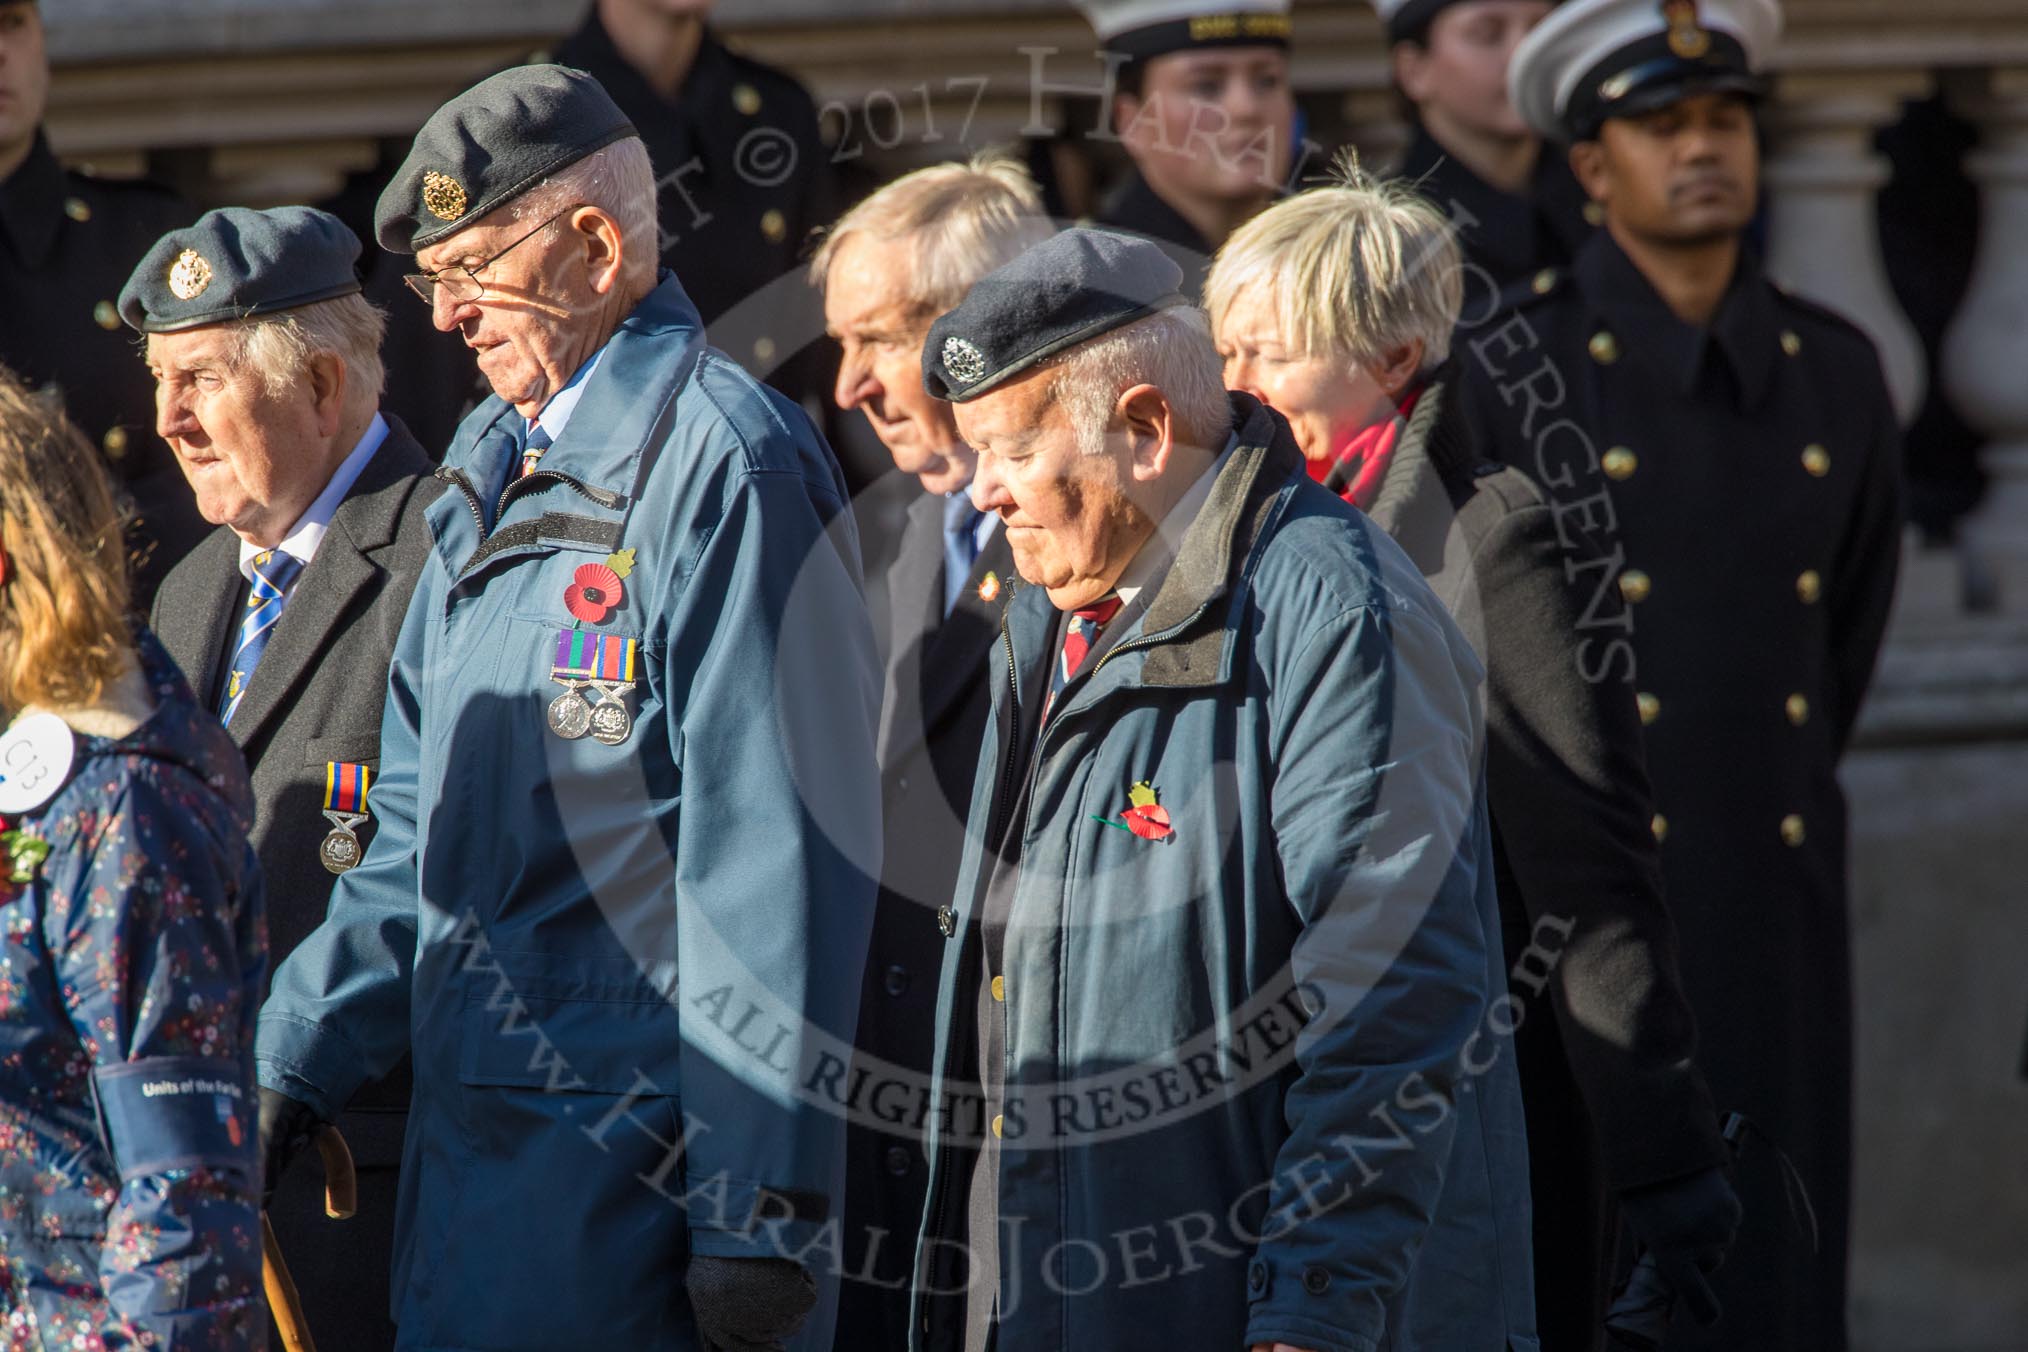 Units of the Far East Air Force (Group C13, 18 members) during the Royal British Legion March Past on Remembrance Sunday at the Cenotaph, Whitehall, Westminster, London, 11 November 2018, 12:16.